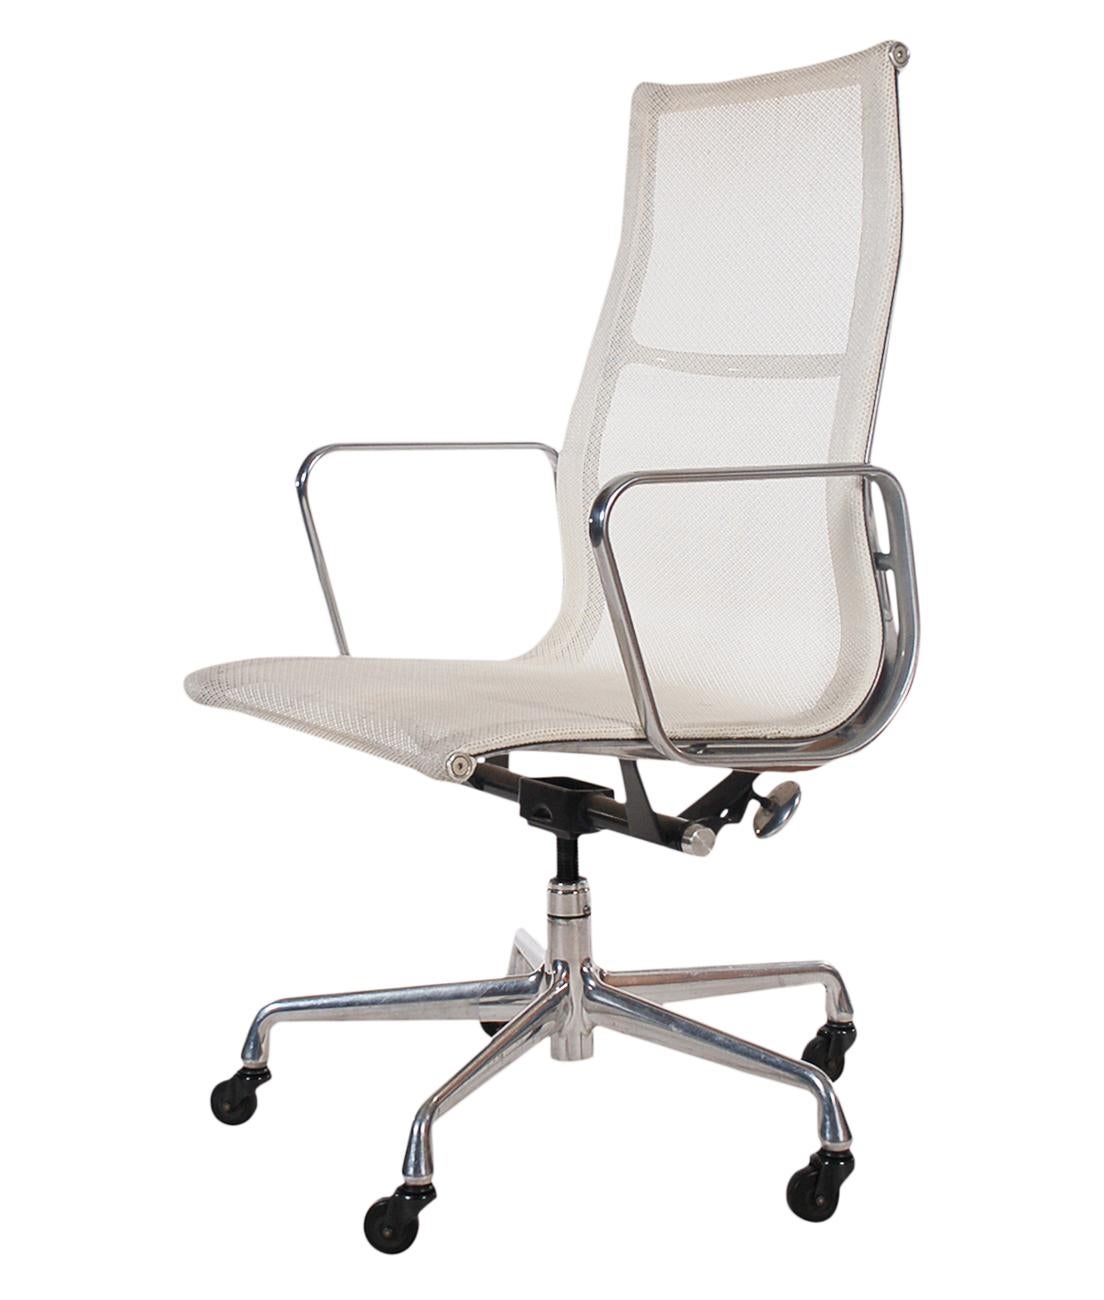 American Mid-Century Modern Charles Eames for Herman Miller Aluminum Group Office Chair